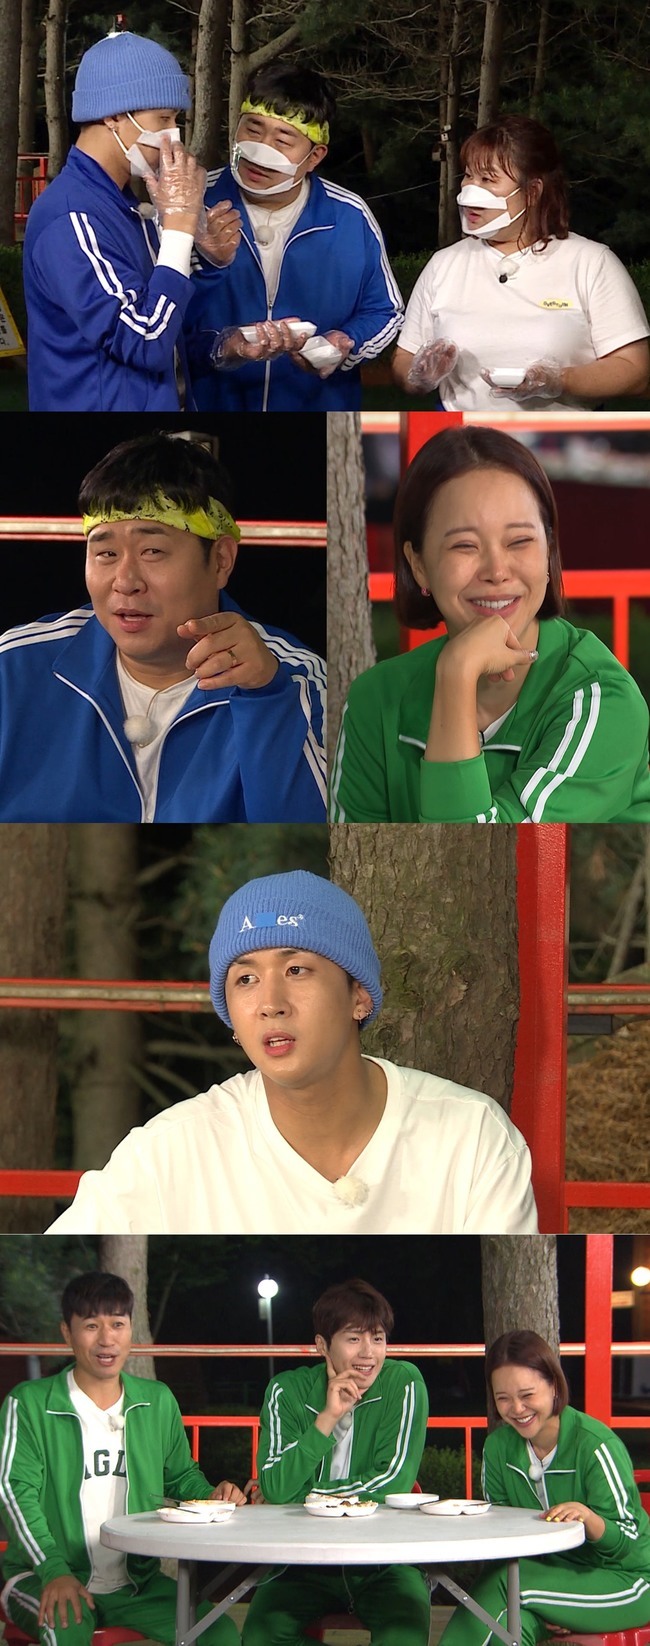 Singer Baek Ji-young had a self-reflection time.In the final story of the feature of Mario Hero on KBS 2TV Season 4 for 1 Night 2 Days (hereinafter referred to as 1 night and 2 days), which will be broadcast at 6:30 pm on July 11, the Travel of six members who demonstrate the special ability of the entertainer responsible for laughter on Sunday night will be released.After a fierce battle last week, the Mario Mokcheong team (Baek Ji-young, Kim Jong-min, and Kim Sun-ho) got a baby food plate and the Mario Power team (Kim Min-kyung, Mun Se-yun, Ravi) got a sauce bowl.Both teams are far short of containing Simona Babčáková menus of one night and two days, which are known to be delicious.Mario Power Tim Mun Se-yun tells Ravi, a worried mealer, how to express his own knowledge.He ordered the operation, saying, It is a space use to put rice, and it is just a step up to raise rice. He then shows a marvelous tower building technology as a demonstration to compress rice.Kim Min-kyung and Ravi are curious that they have performed the Infinite End Tower show according to his teachings.Meanwhile, Simona Babčákovás best menu, Kimchi stew, will be put on a bowl, and the Mario Power team and the Mario Mokcheong team will clash.In the team confrontation on the table, the Mario Mokcheong team is laughing with poor teamwork at all levels.In particular, Kim Sun-ho repeatedly apologized for the hint that he was bursting into a fierce battle, saying, I do not know what it is.